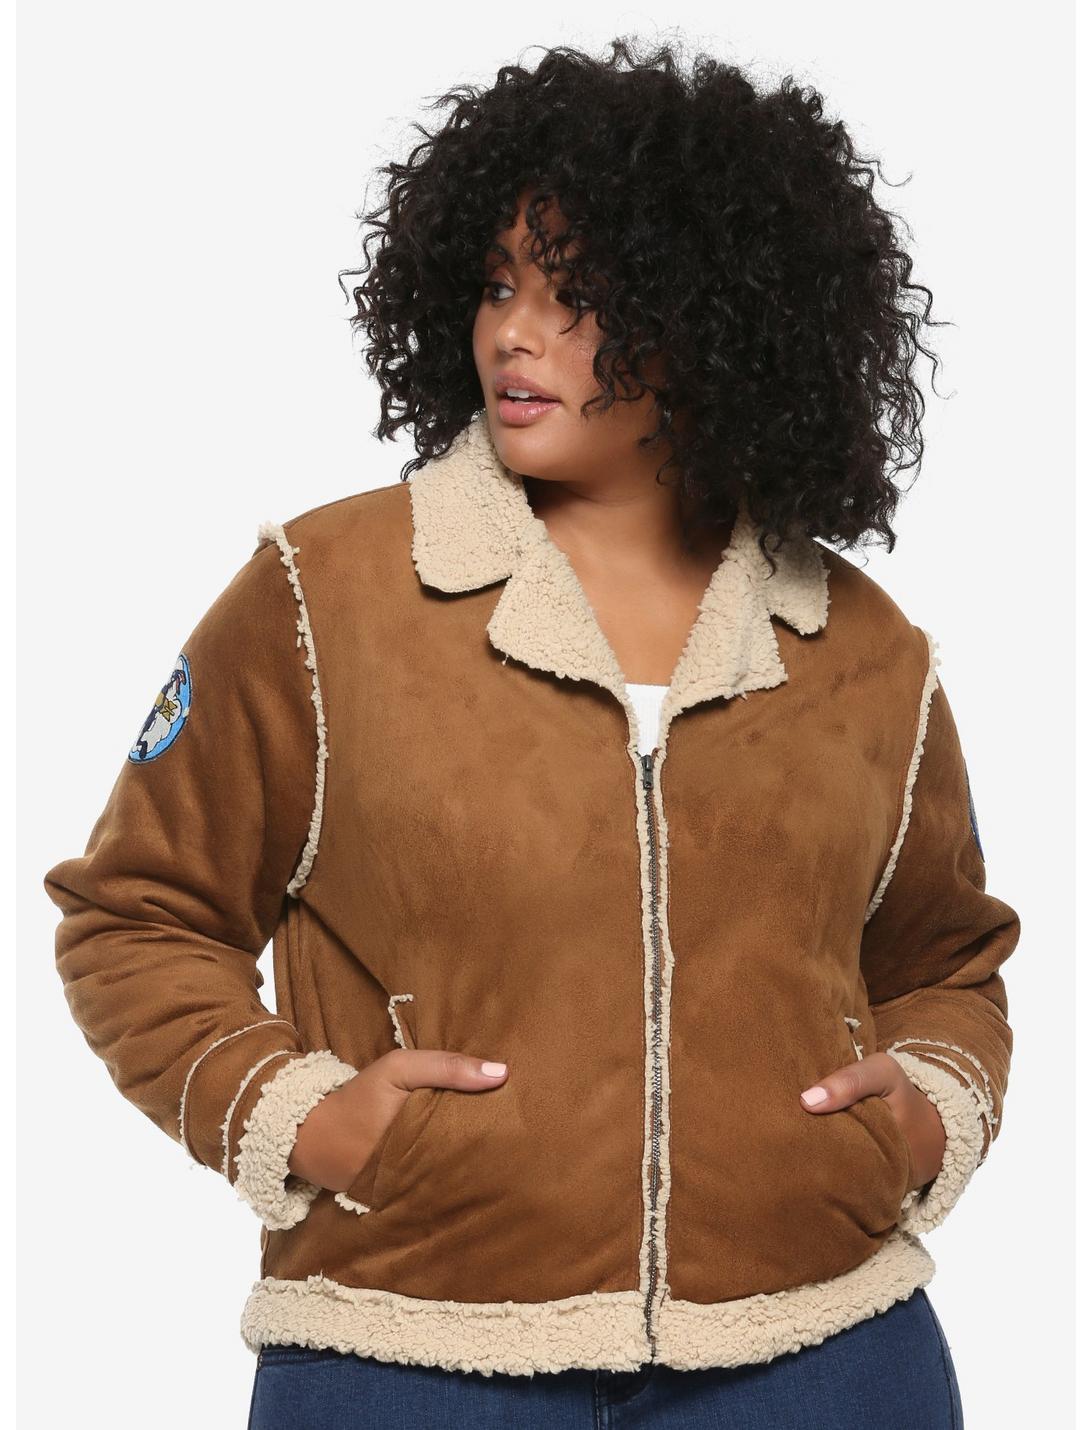 Her Universe Tomb Raider Shadow Of The Tomb Raider Girls Aviator Cosplay Jacket Plus Size, TAN/BEIGE, hi-res